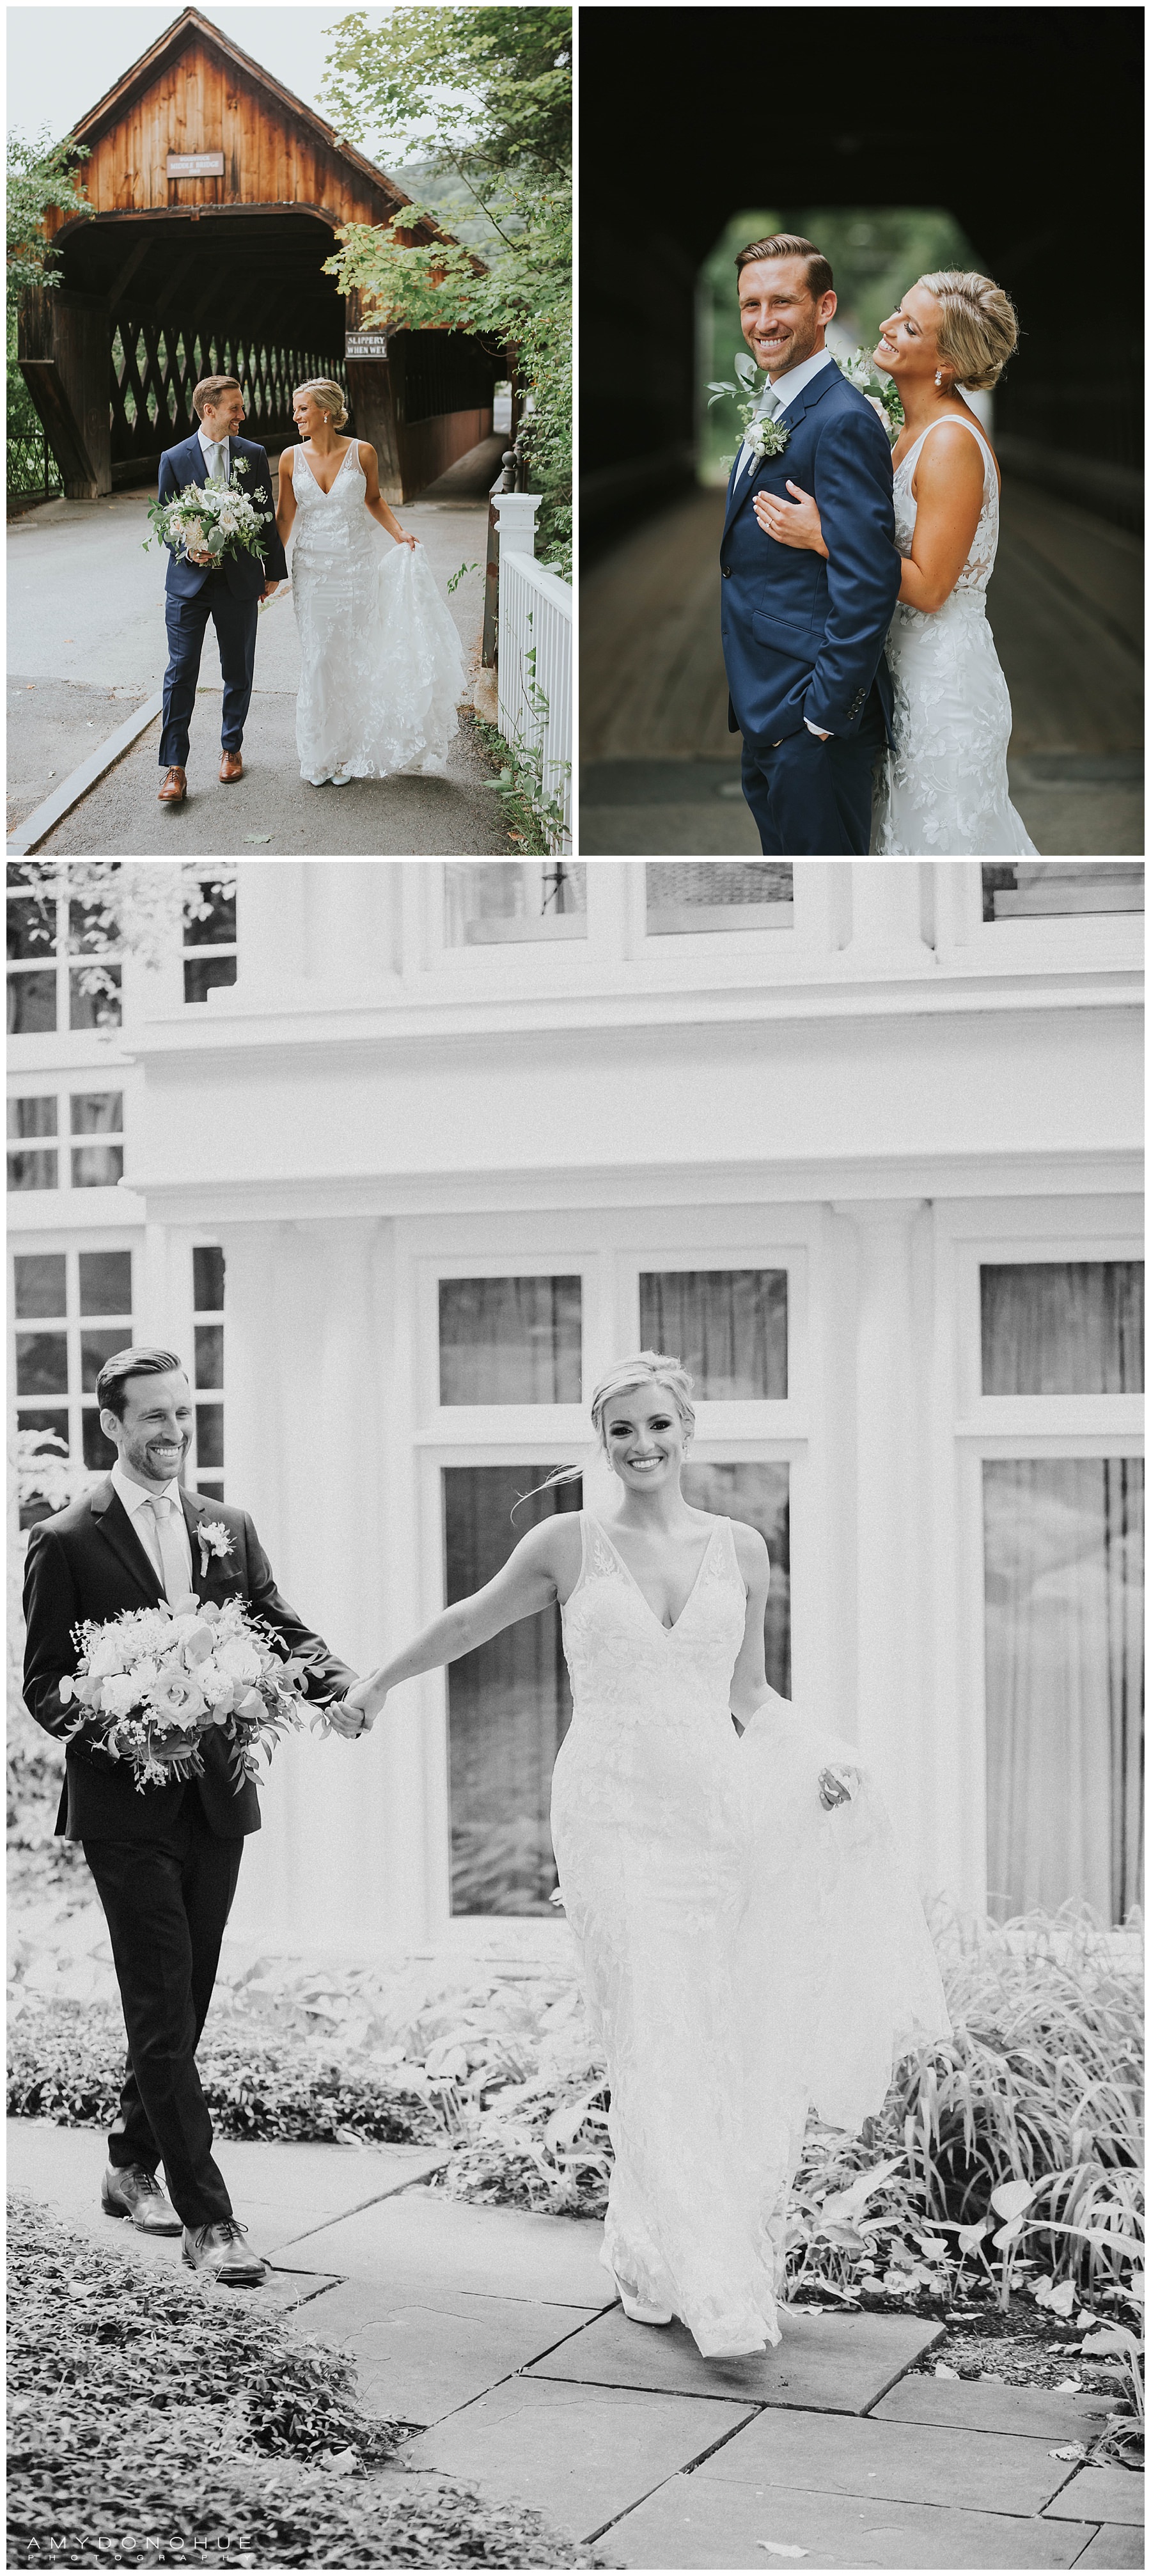 Bride and Groom Portraits | Woodstock, Vermont Wedding Photographer | © Amy Donohue Photography